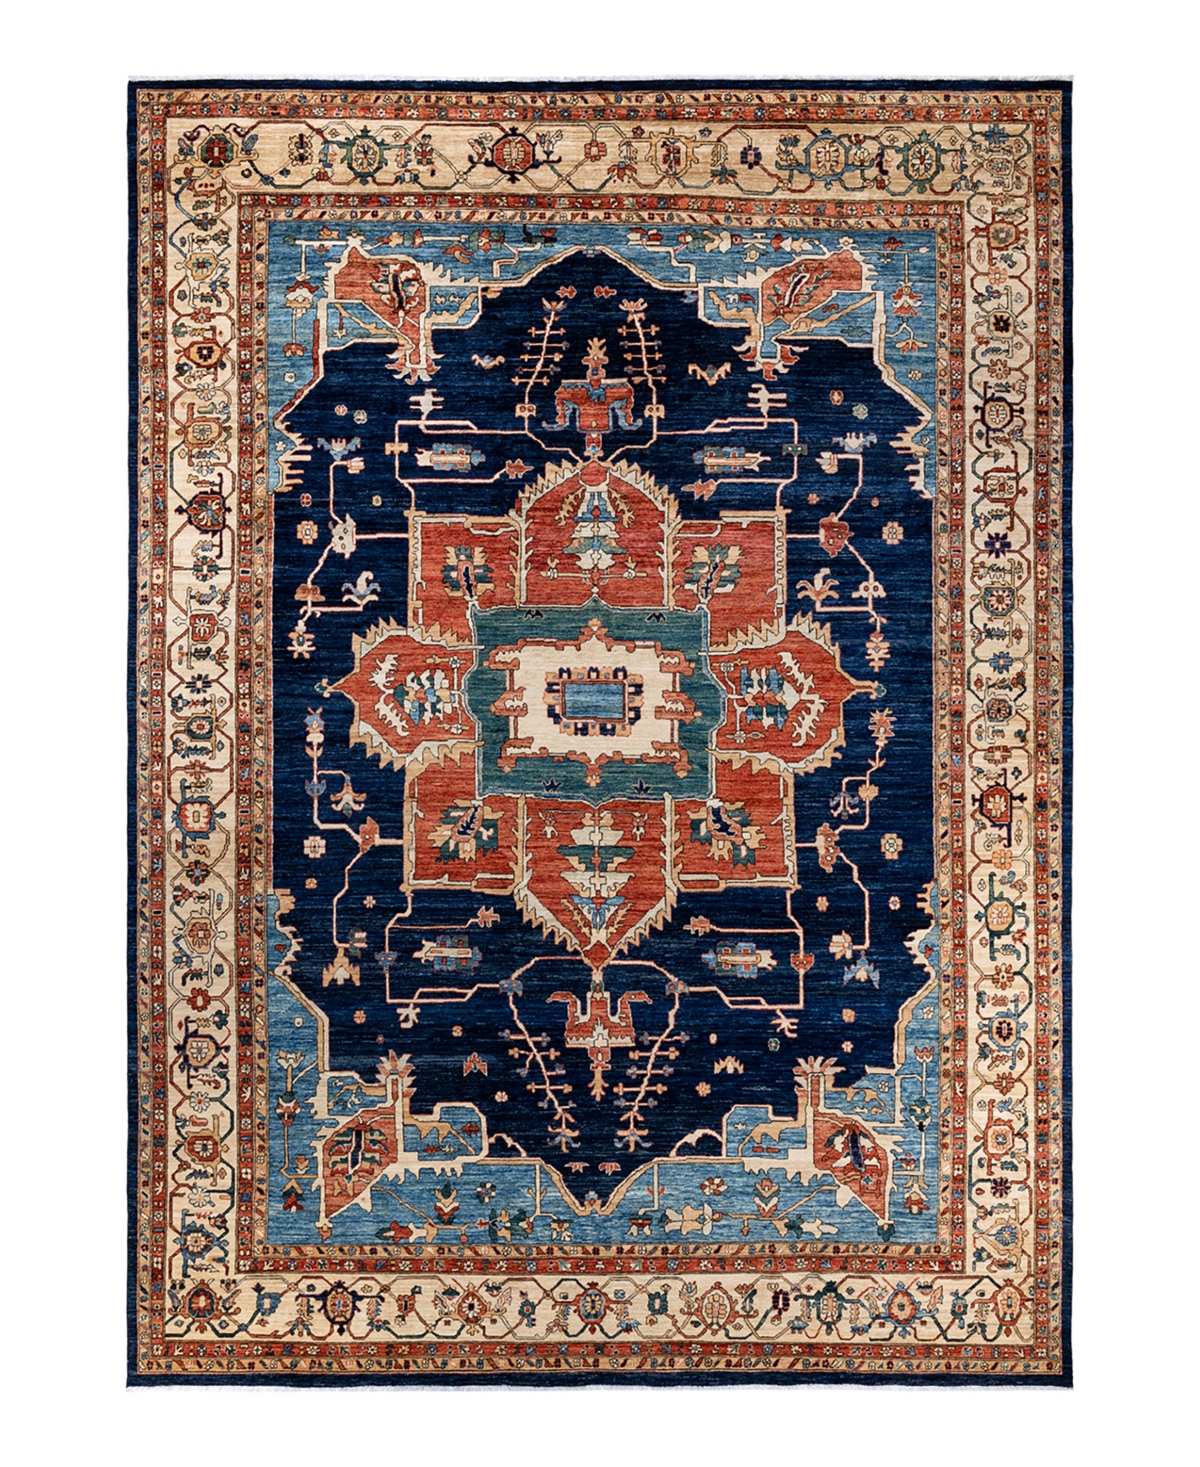 Adorn Hand Woven Rugs Serapi M1973 9'11in x 13'10in Area Rug - Blue